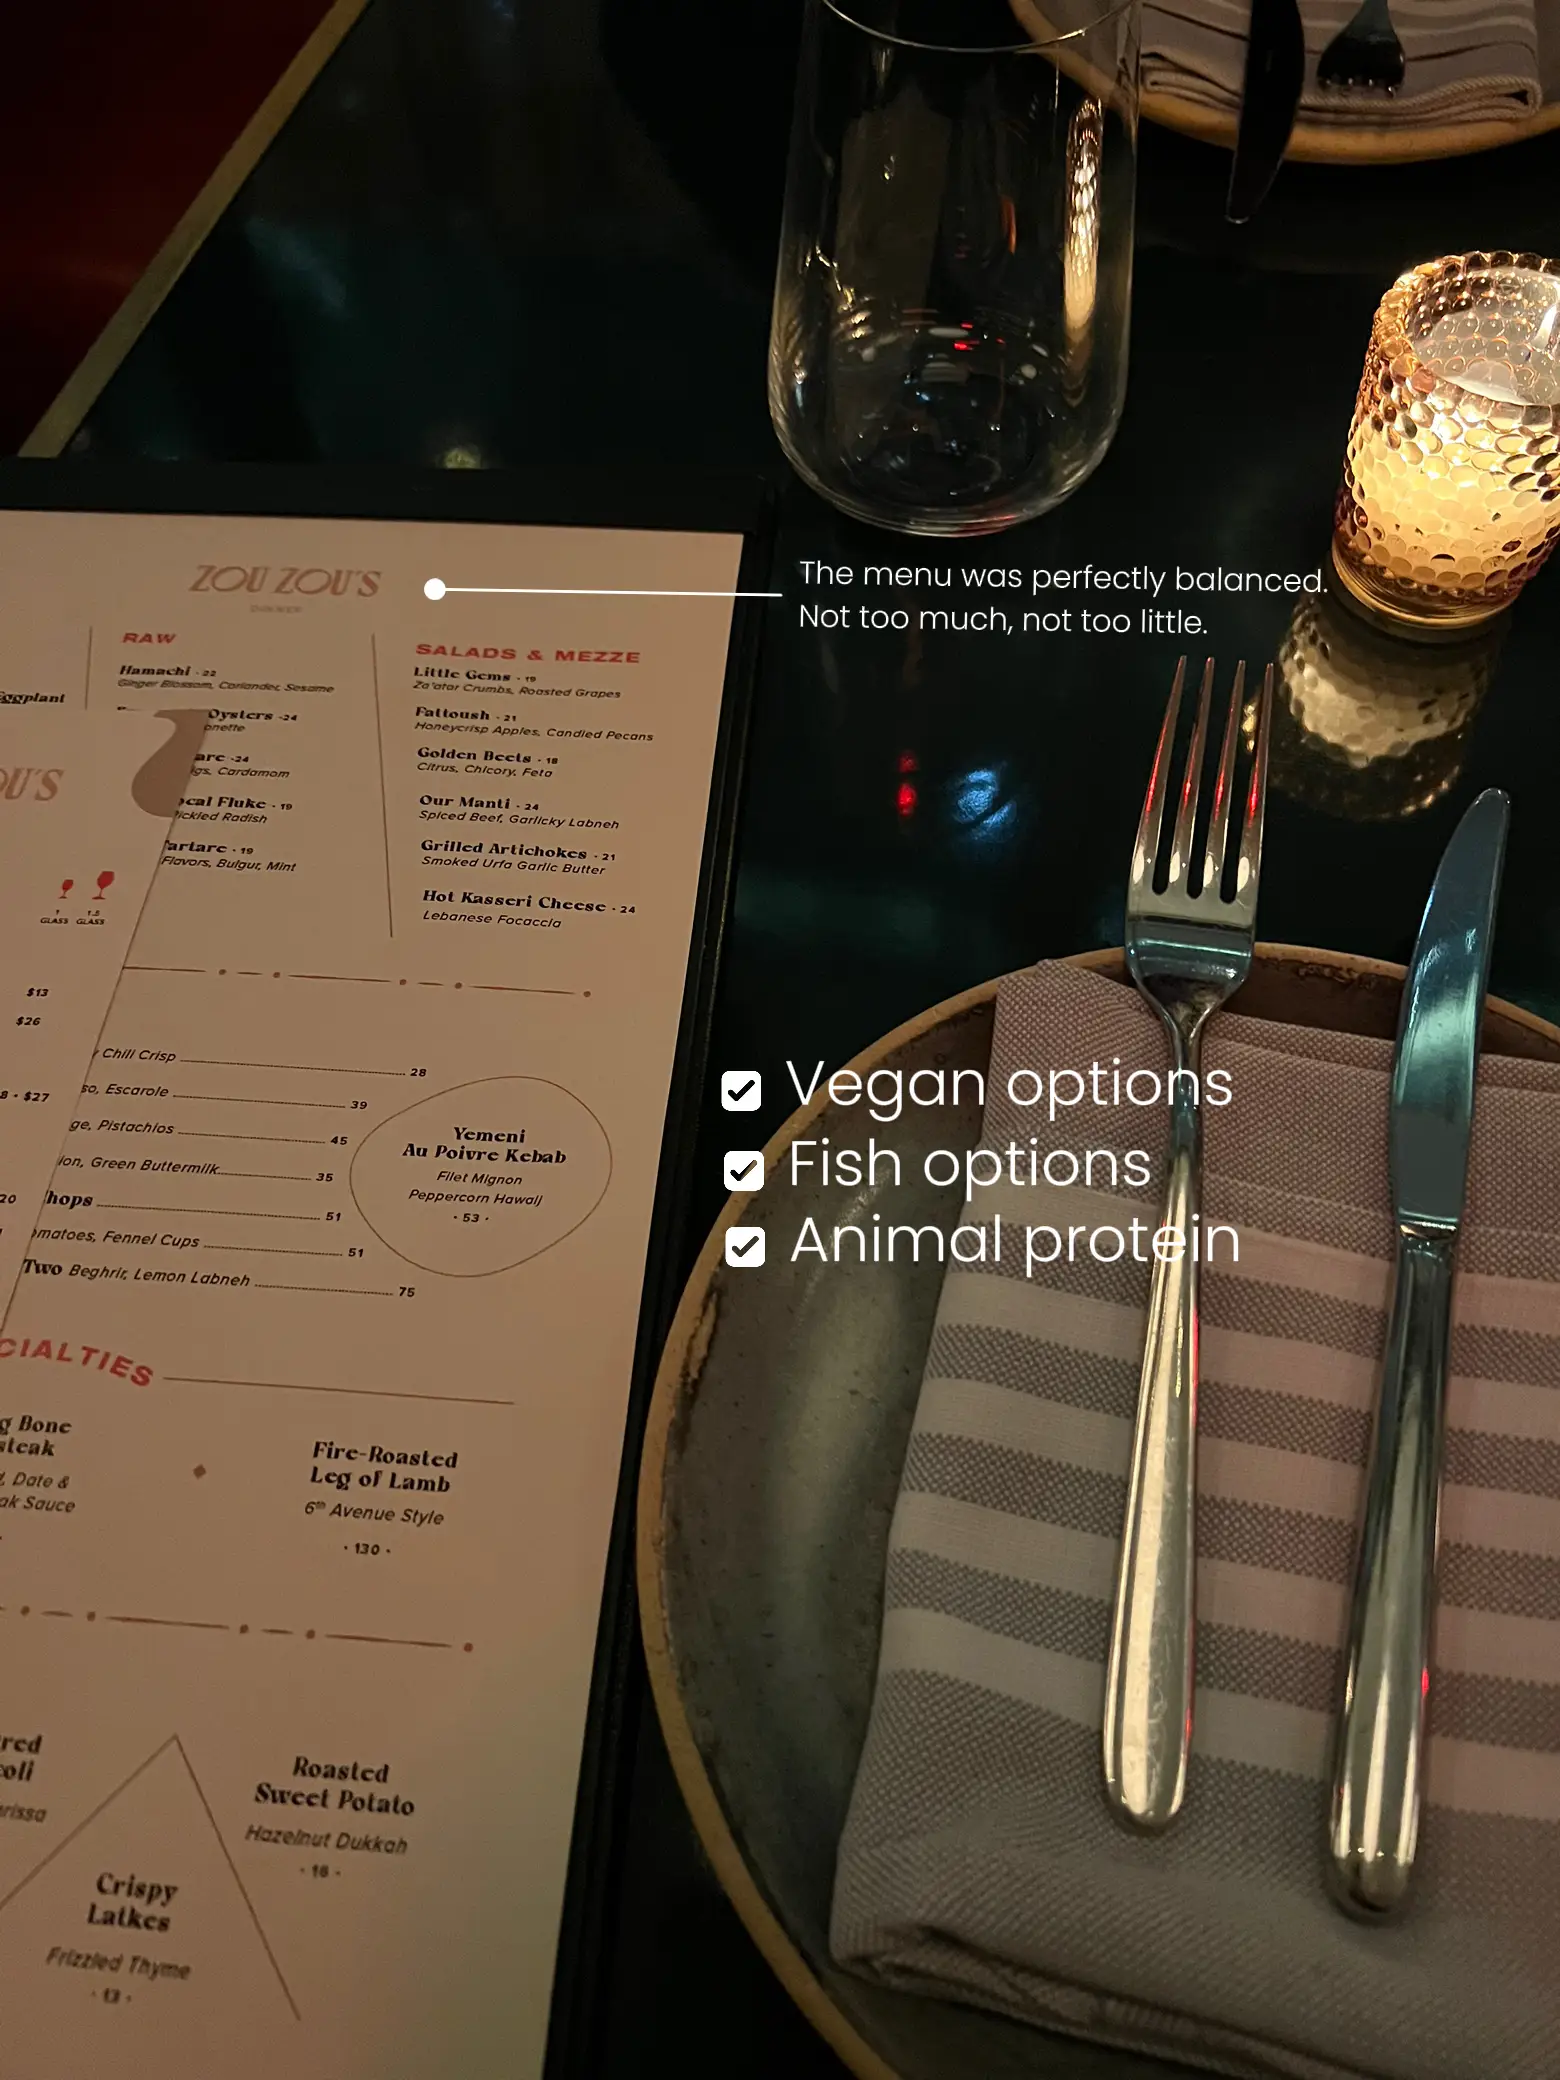  A menu with a variety of options including vegan, fish and animal protein.